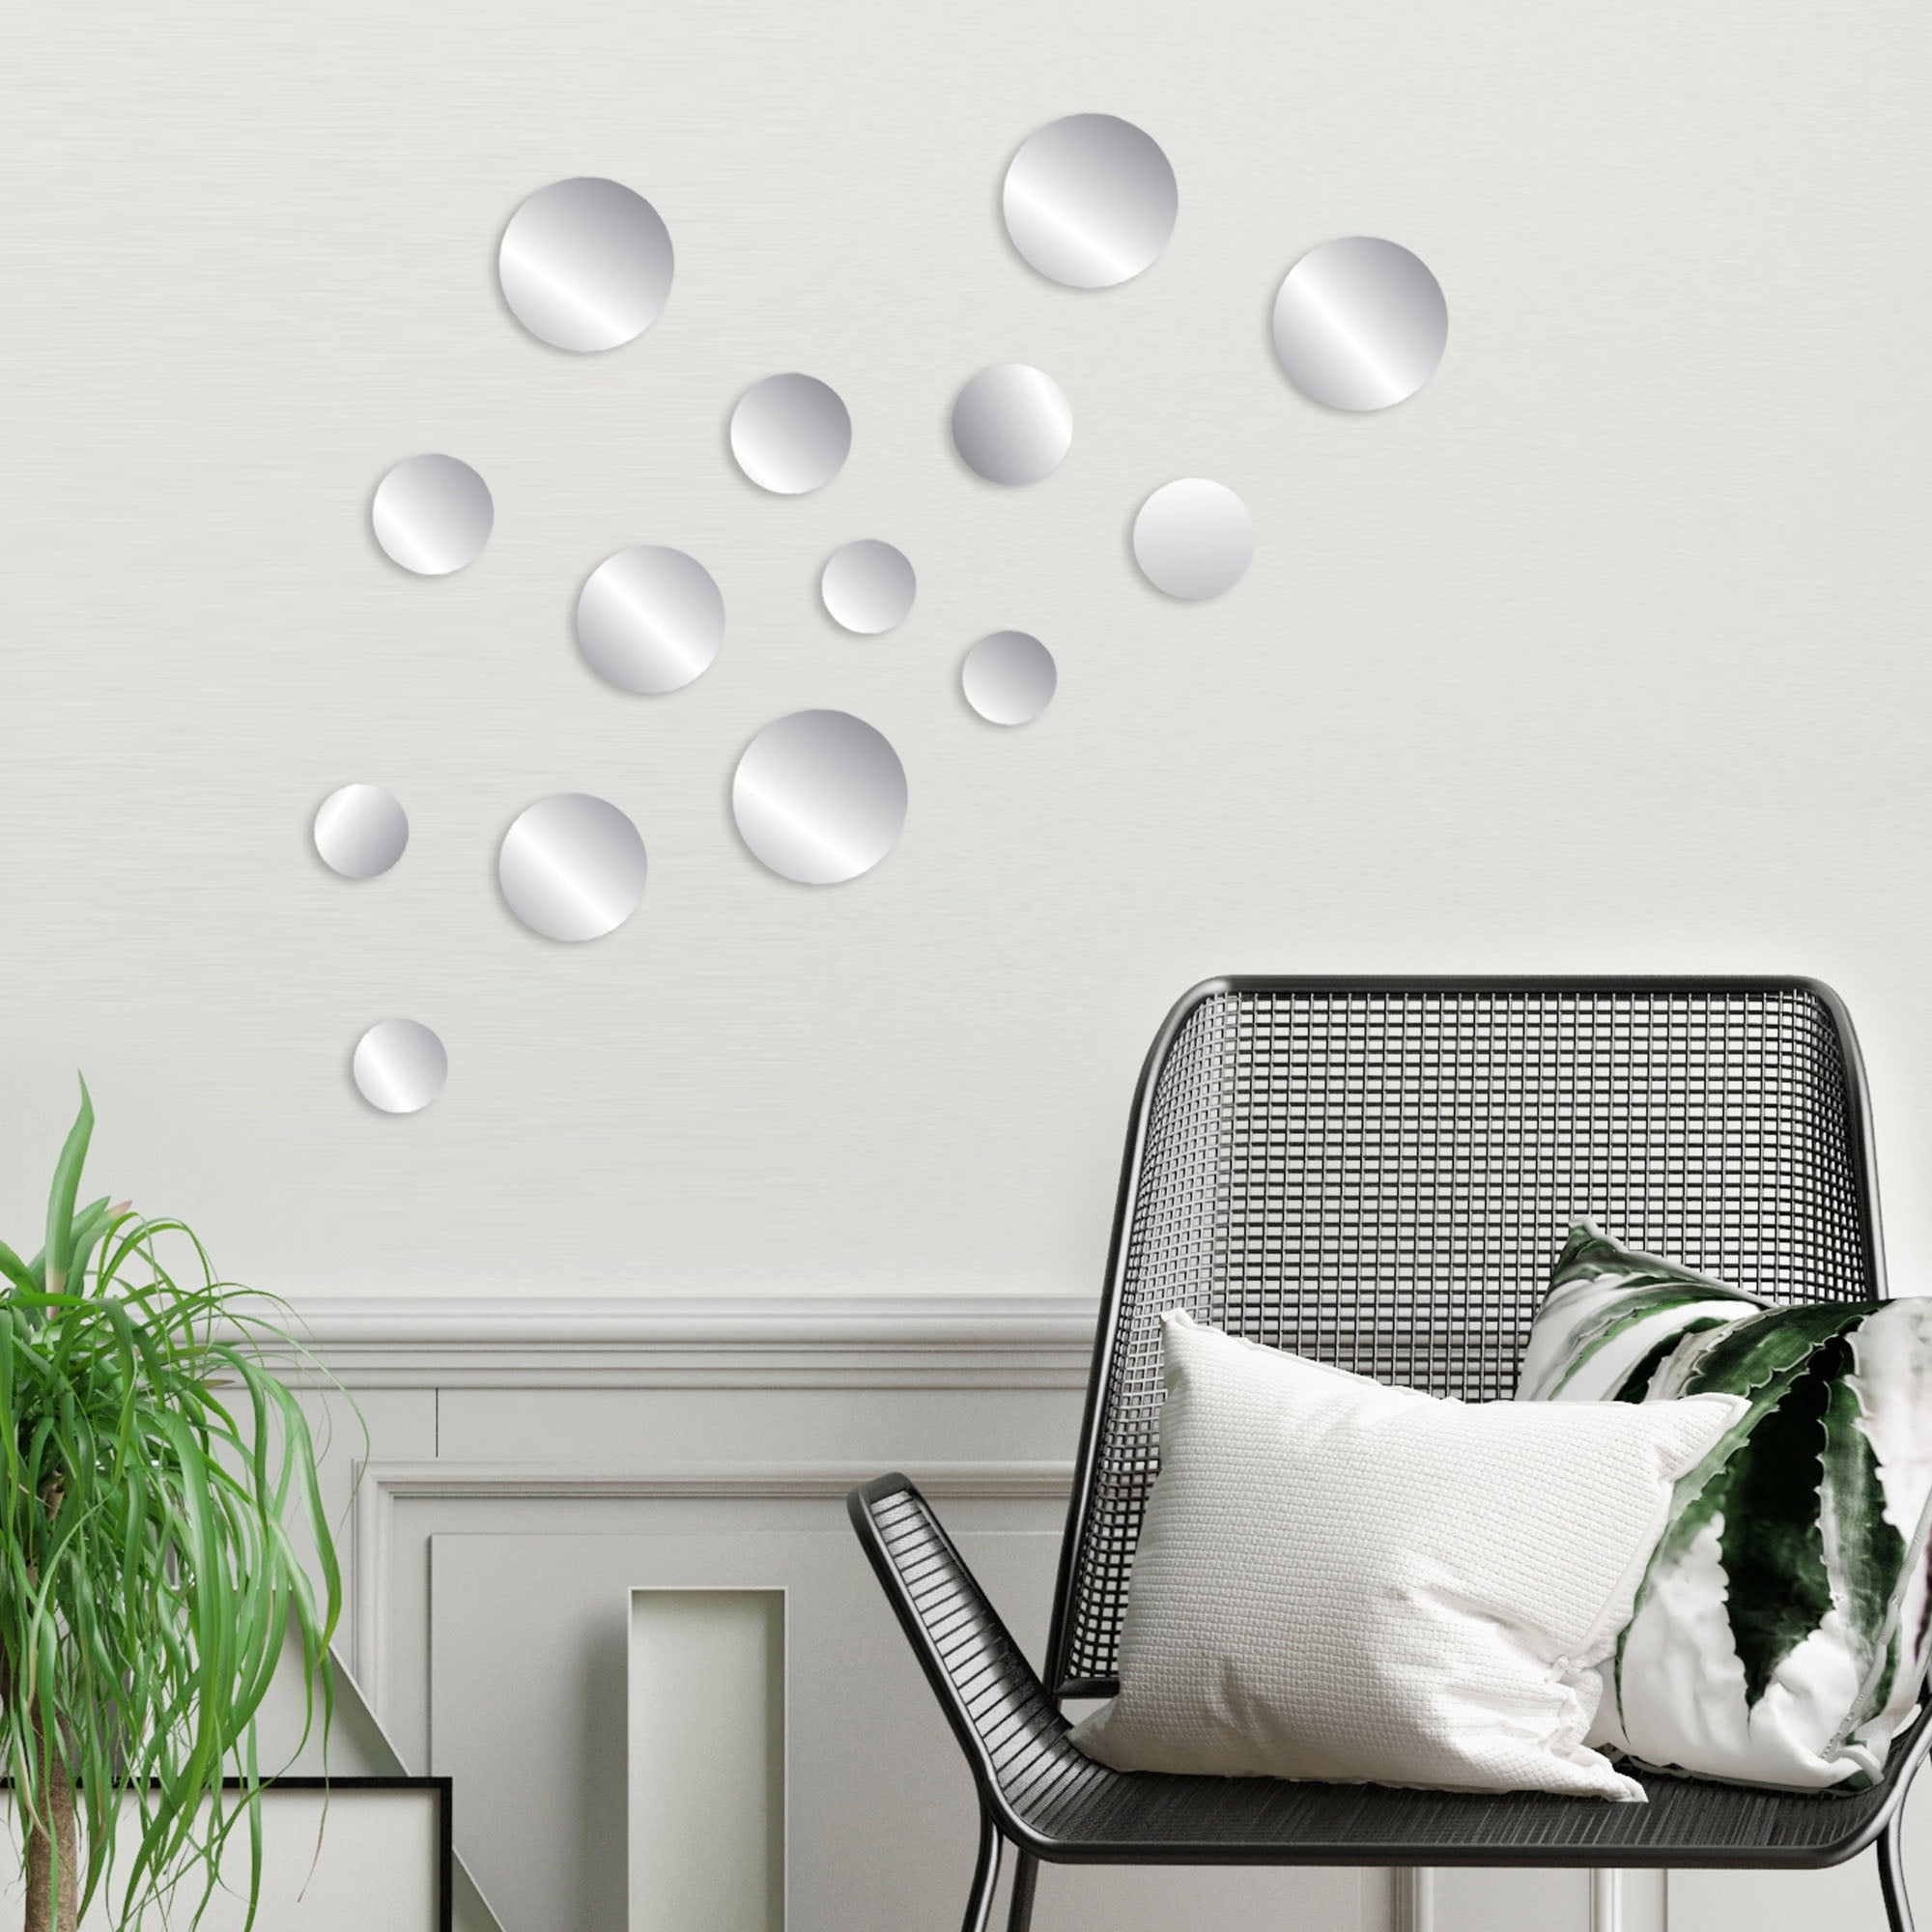 Circle Stick on Mirrors for Wall Peel And Stick Wall Decals for Kids  Electrostatic Glass Stickers Glue Window Film Removable Bathroom Bathroom  Glass Stickers Wall Sticker Decorations for Women 